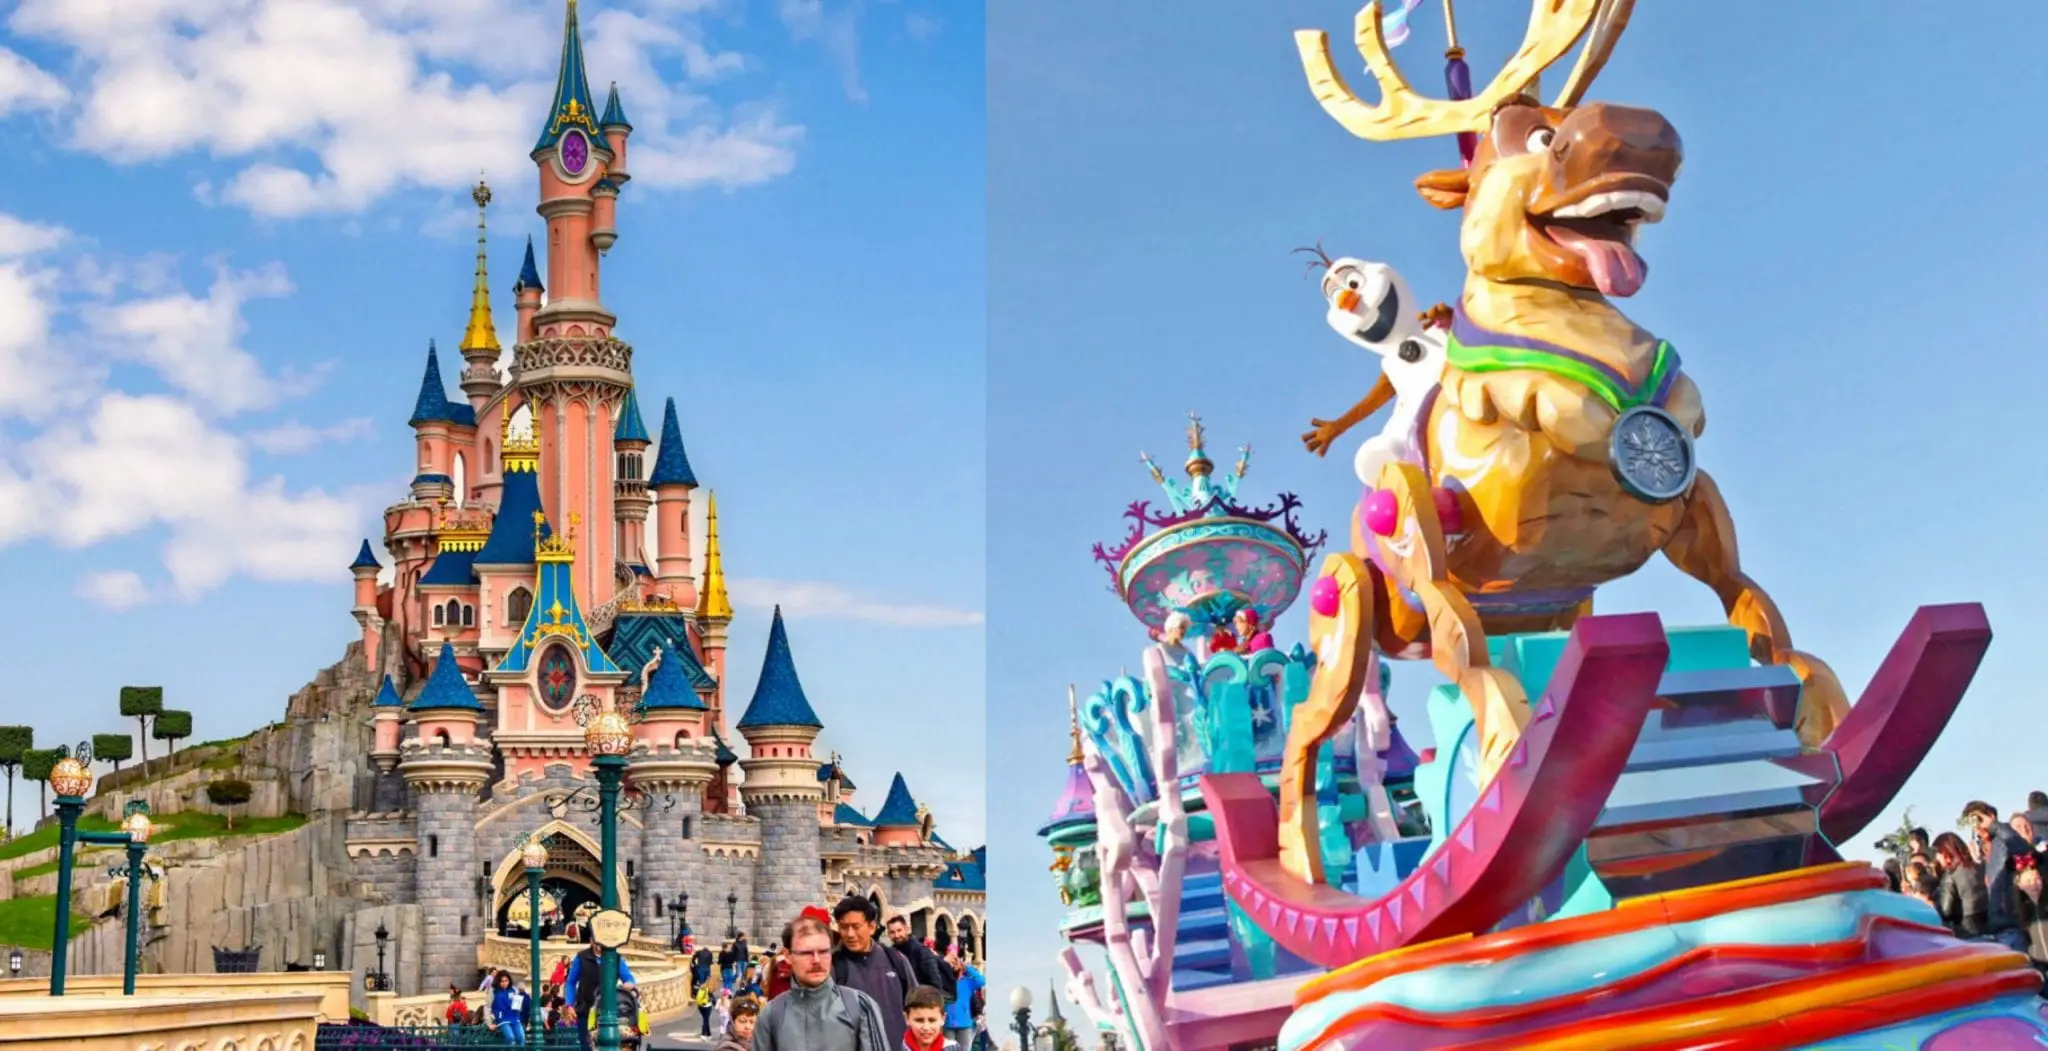 Toevoeging Parameters Afdeling Disneyland Paris Will Soon Be Home To 'Frozen' Land Filled With Ice!